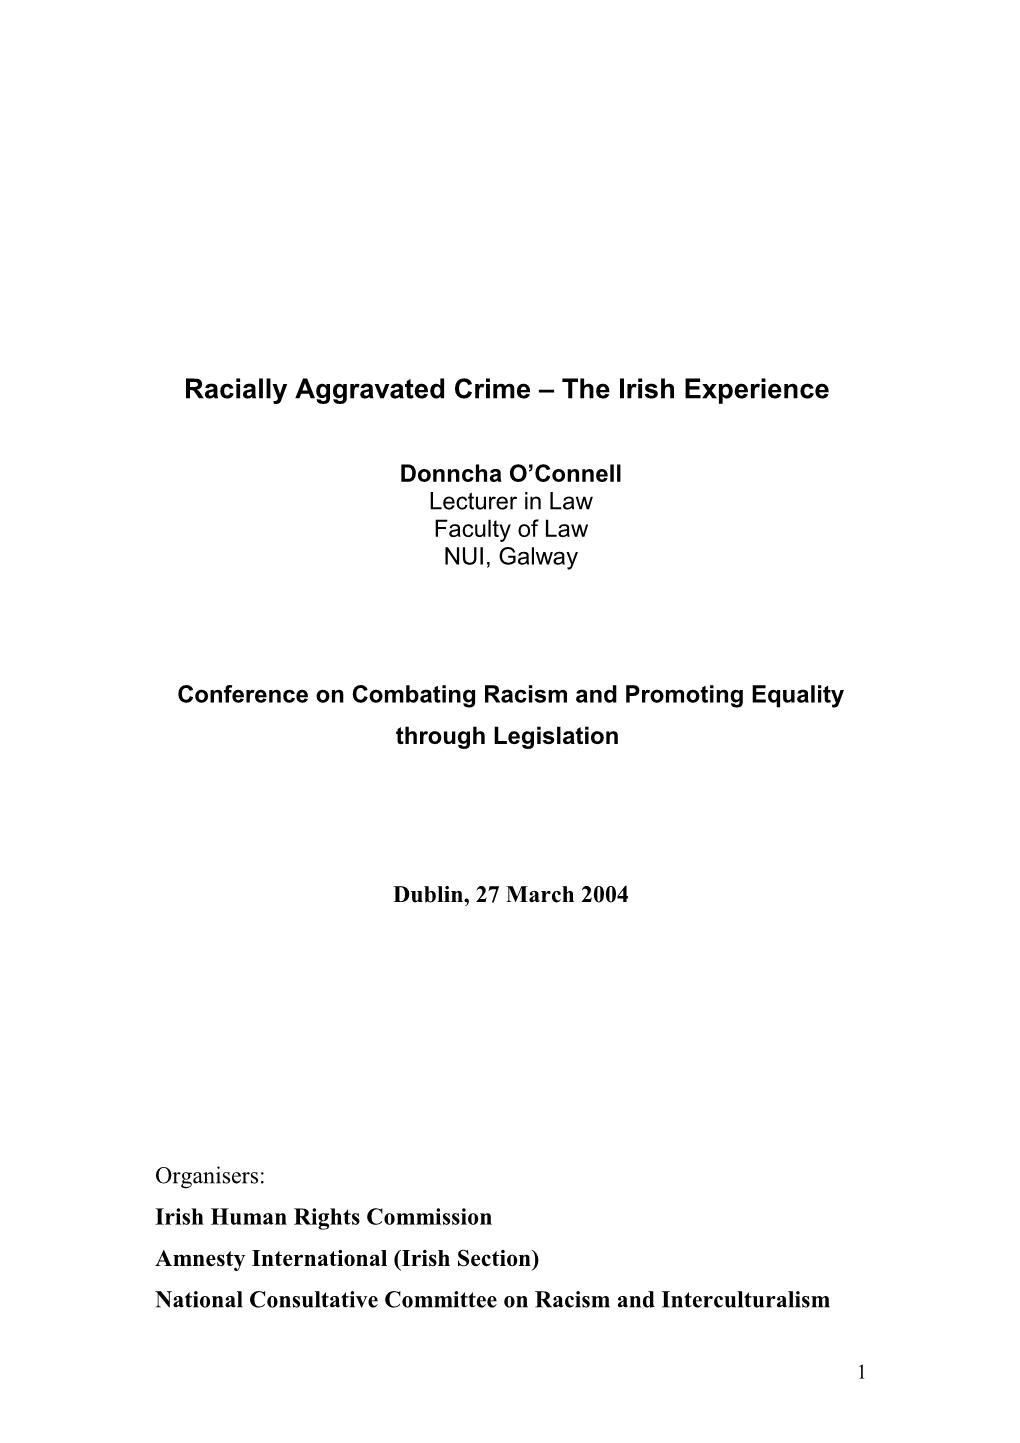 Ihrc / Amnesty Conference on Racism